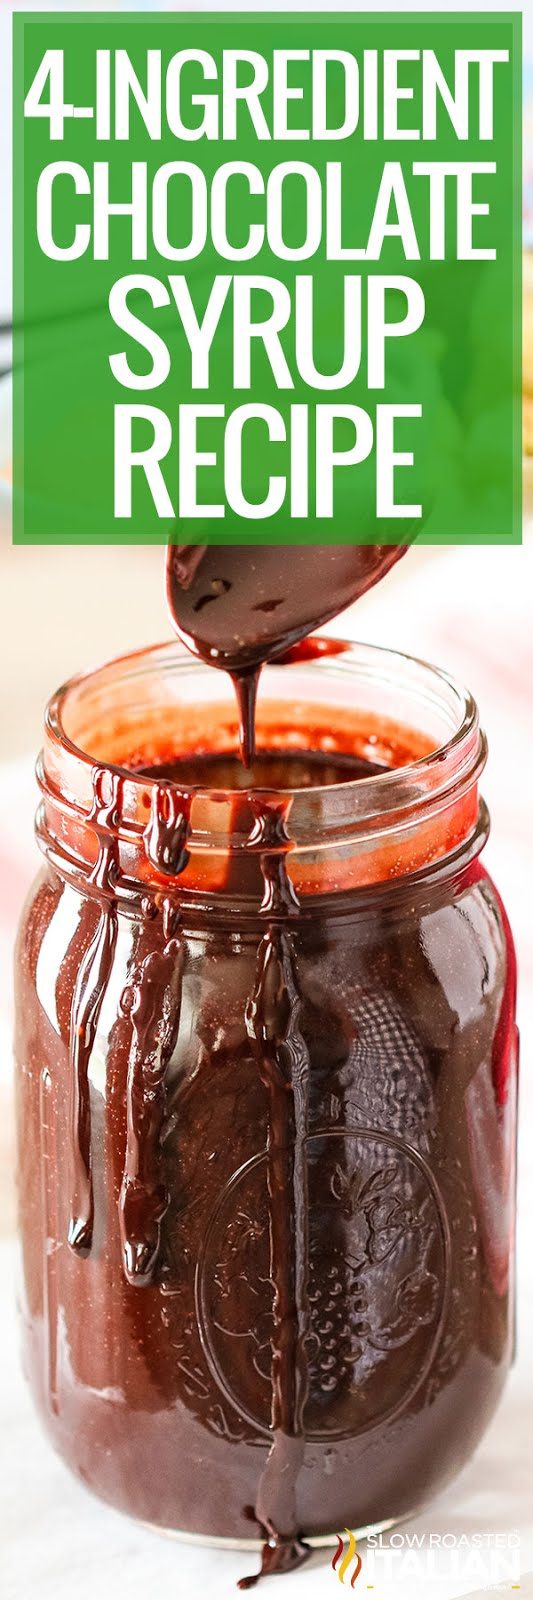 titled image for chocolate syrup recipe